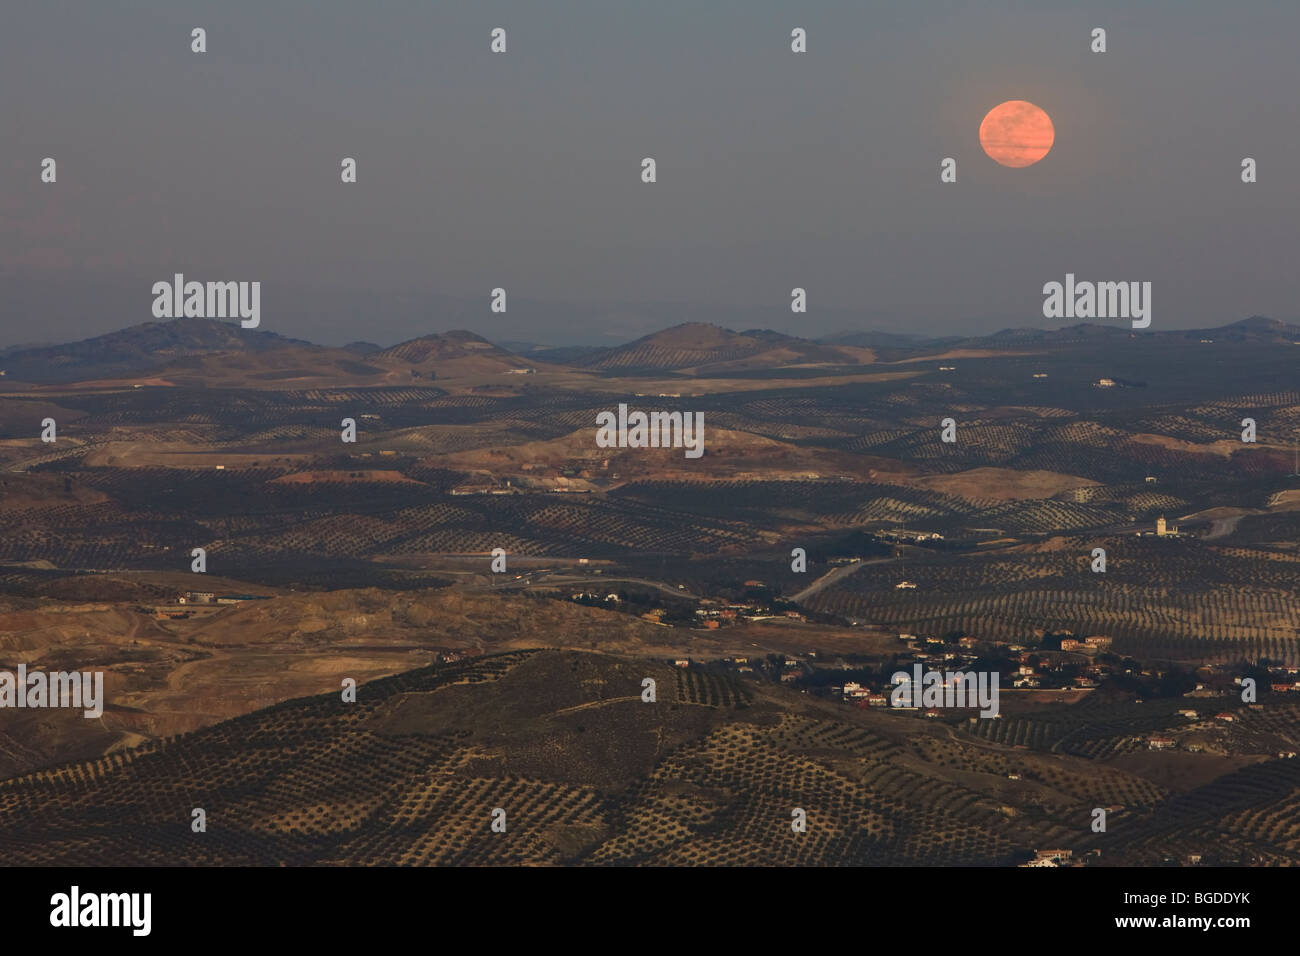 Moon rise after sunset over Olive Groves and the City of Jaen, Province of Jaen, Andalusia (Andalucia), Spain, Europe. Stock Photo